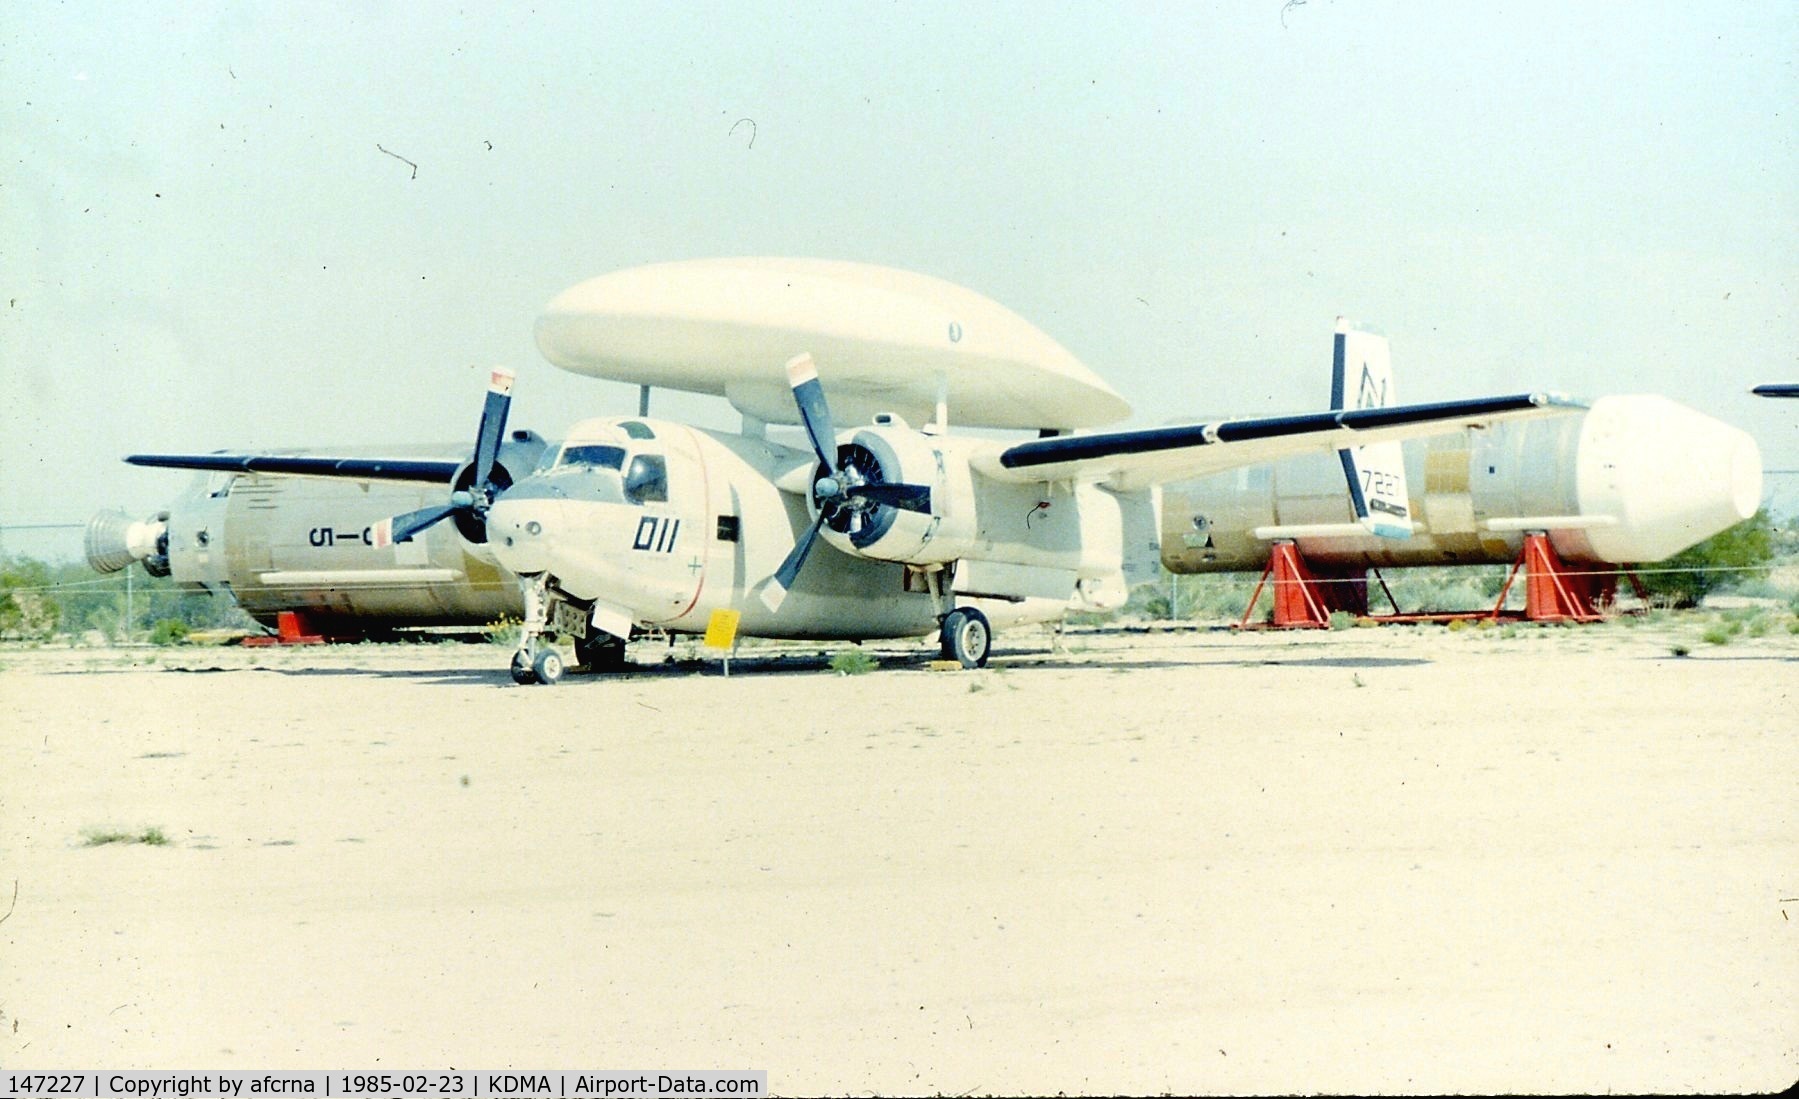 147227, Grumman E-1B Tracer (G-117) C/N 26, PRIOR TO RESTORATION AND NEW PAINT